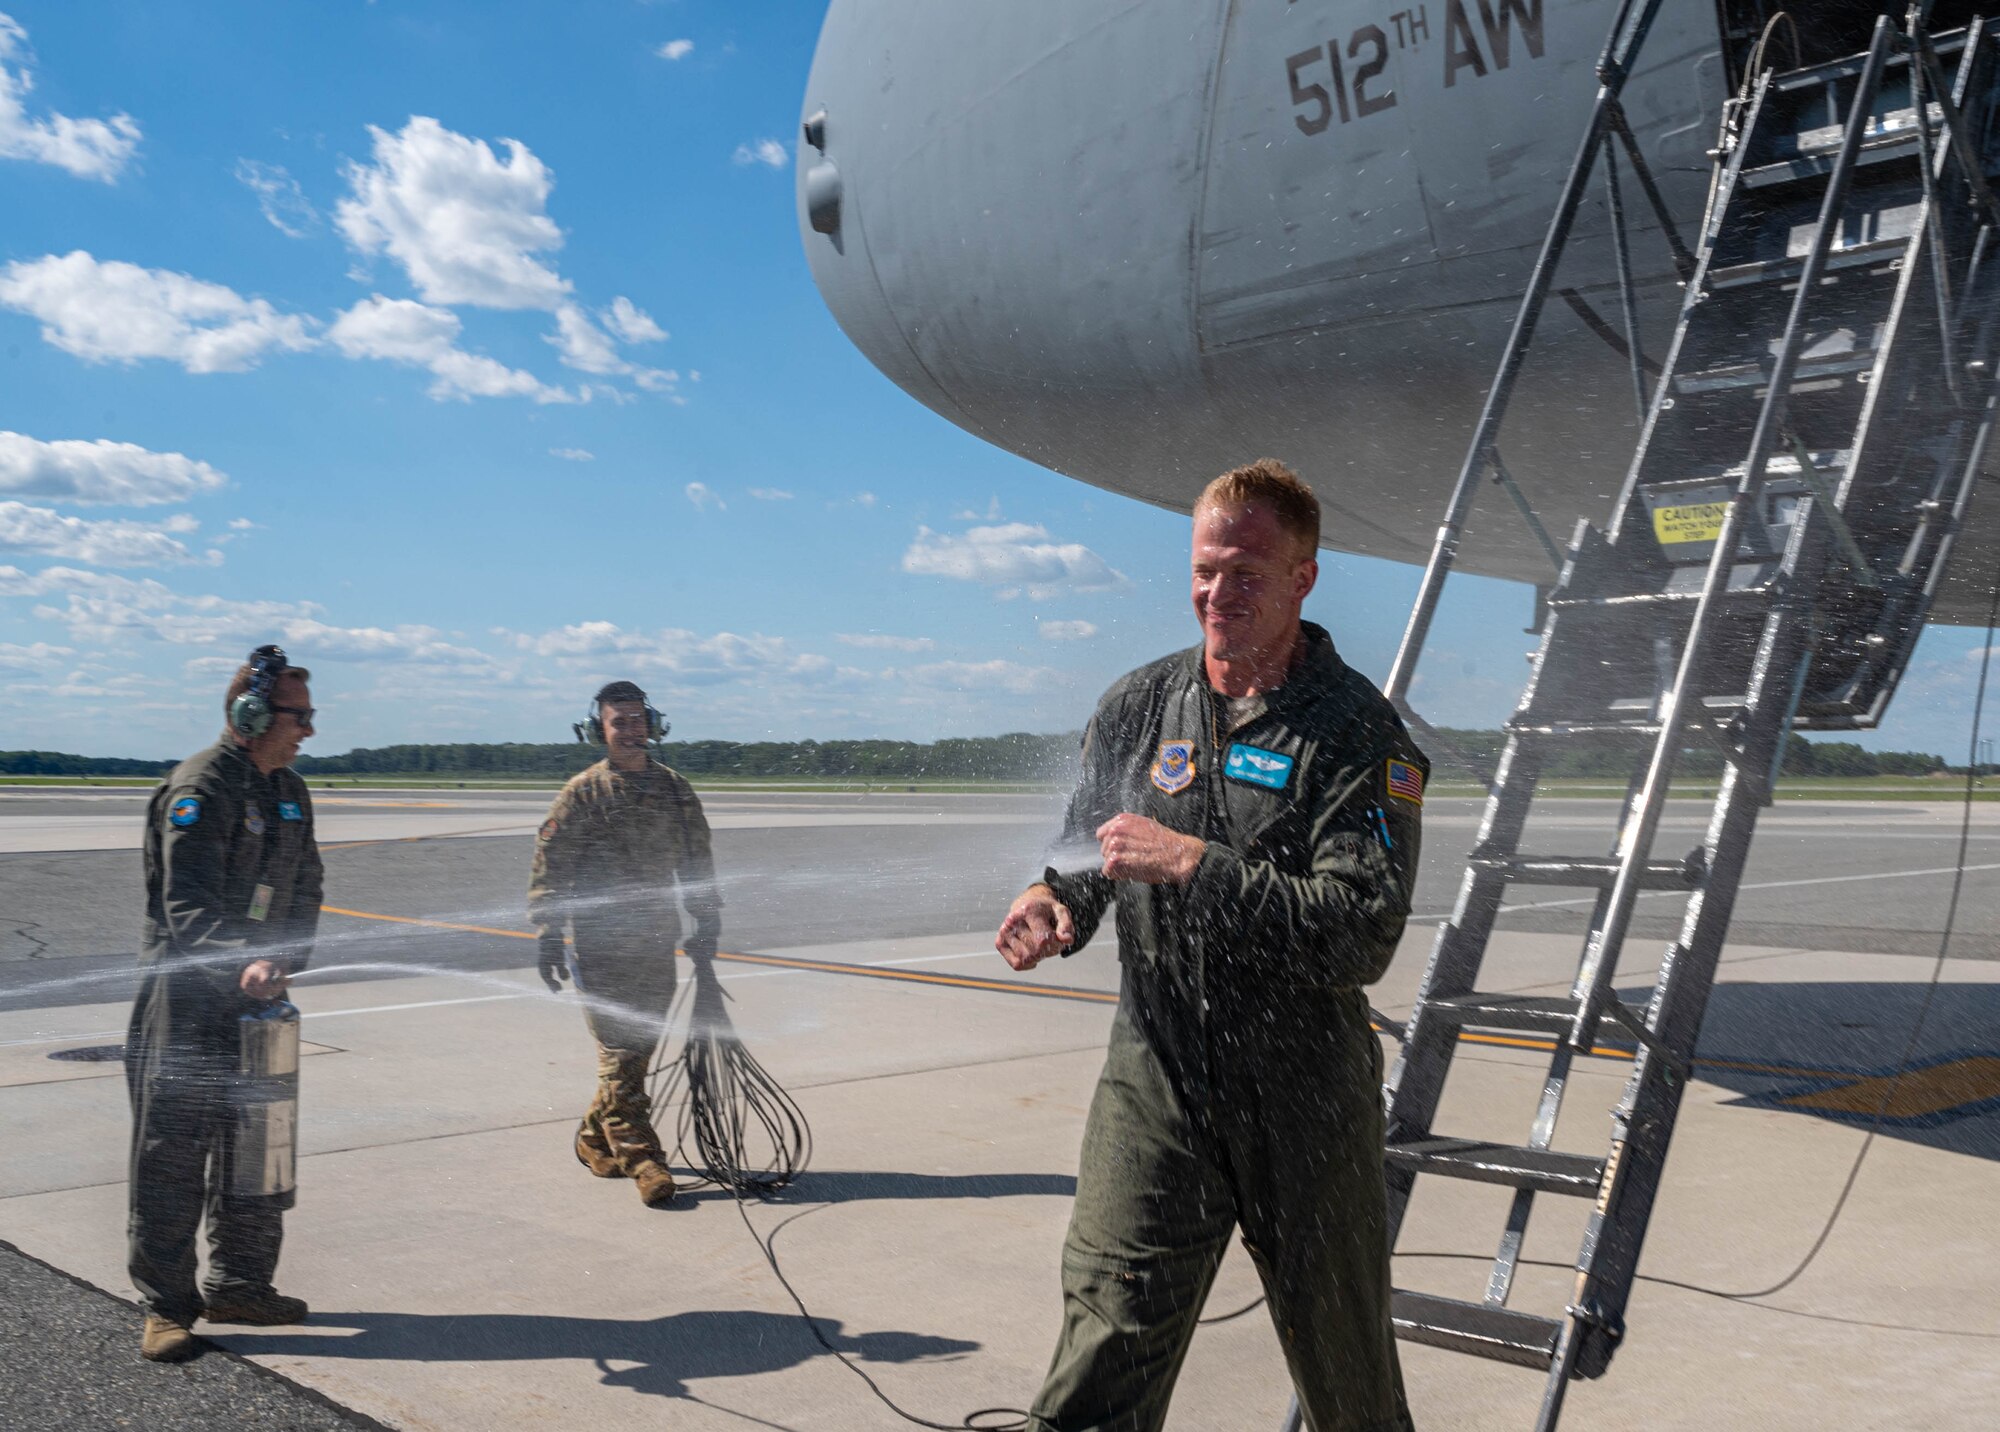 Lt. Col. John Habbestad, 9th Airlift Squadron commander, is sprayed with water to celebrate his final C-5M Super Galaxy flight as the 9th AS commander at Dover Air Force Base, Delaware, June 23, 2021. Habbestad served as commander for two years before. (U.S. Air Force photo by Senior Airman Faith Schaefer)